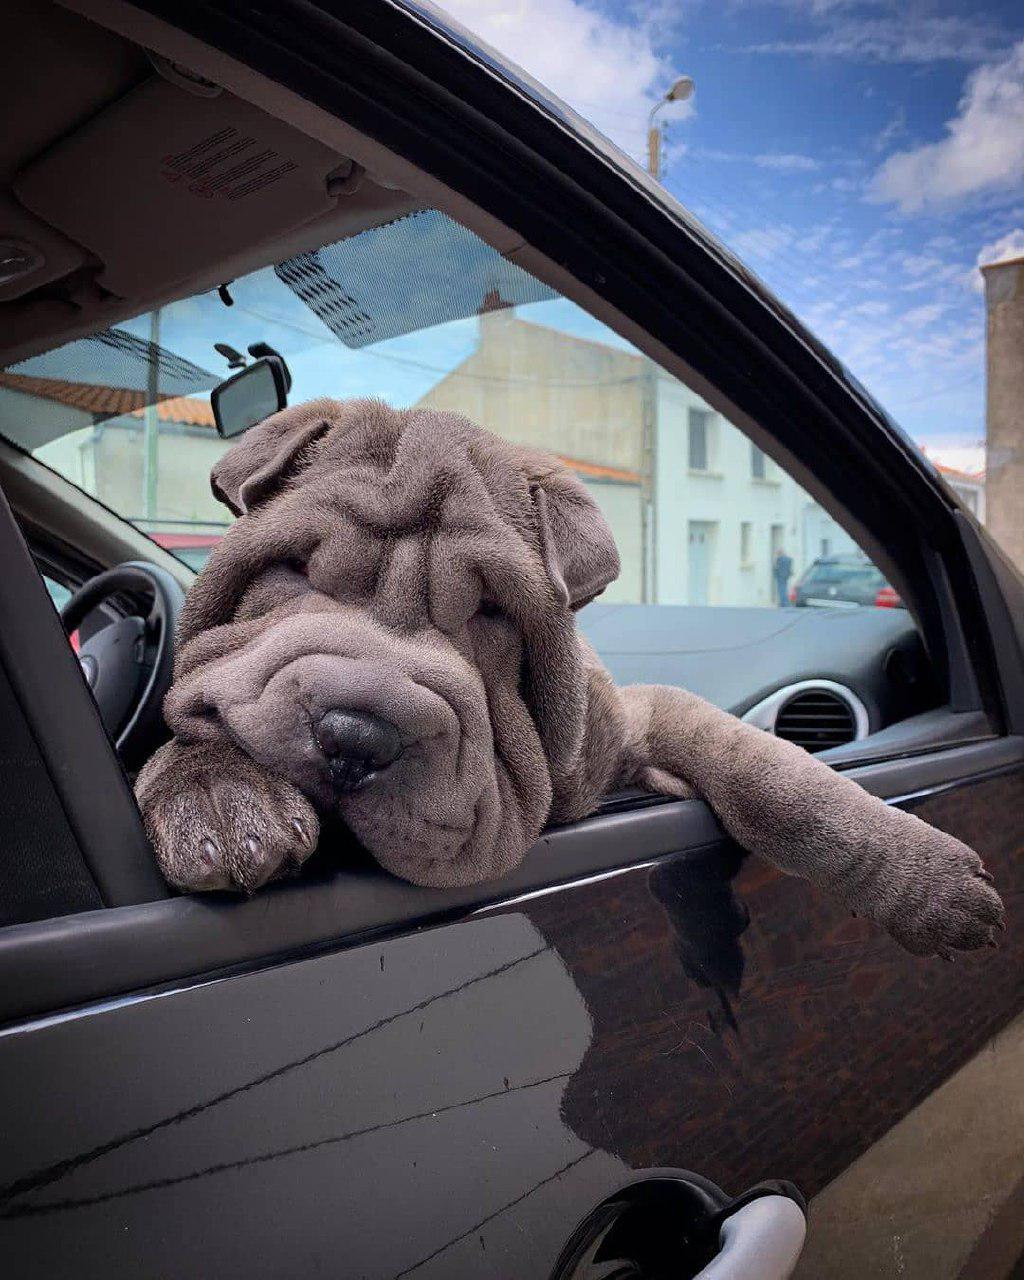 A Shar Pei leaning towards the window while sitting in the passenger seat